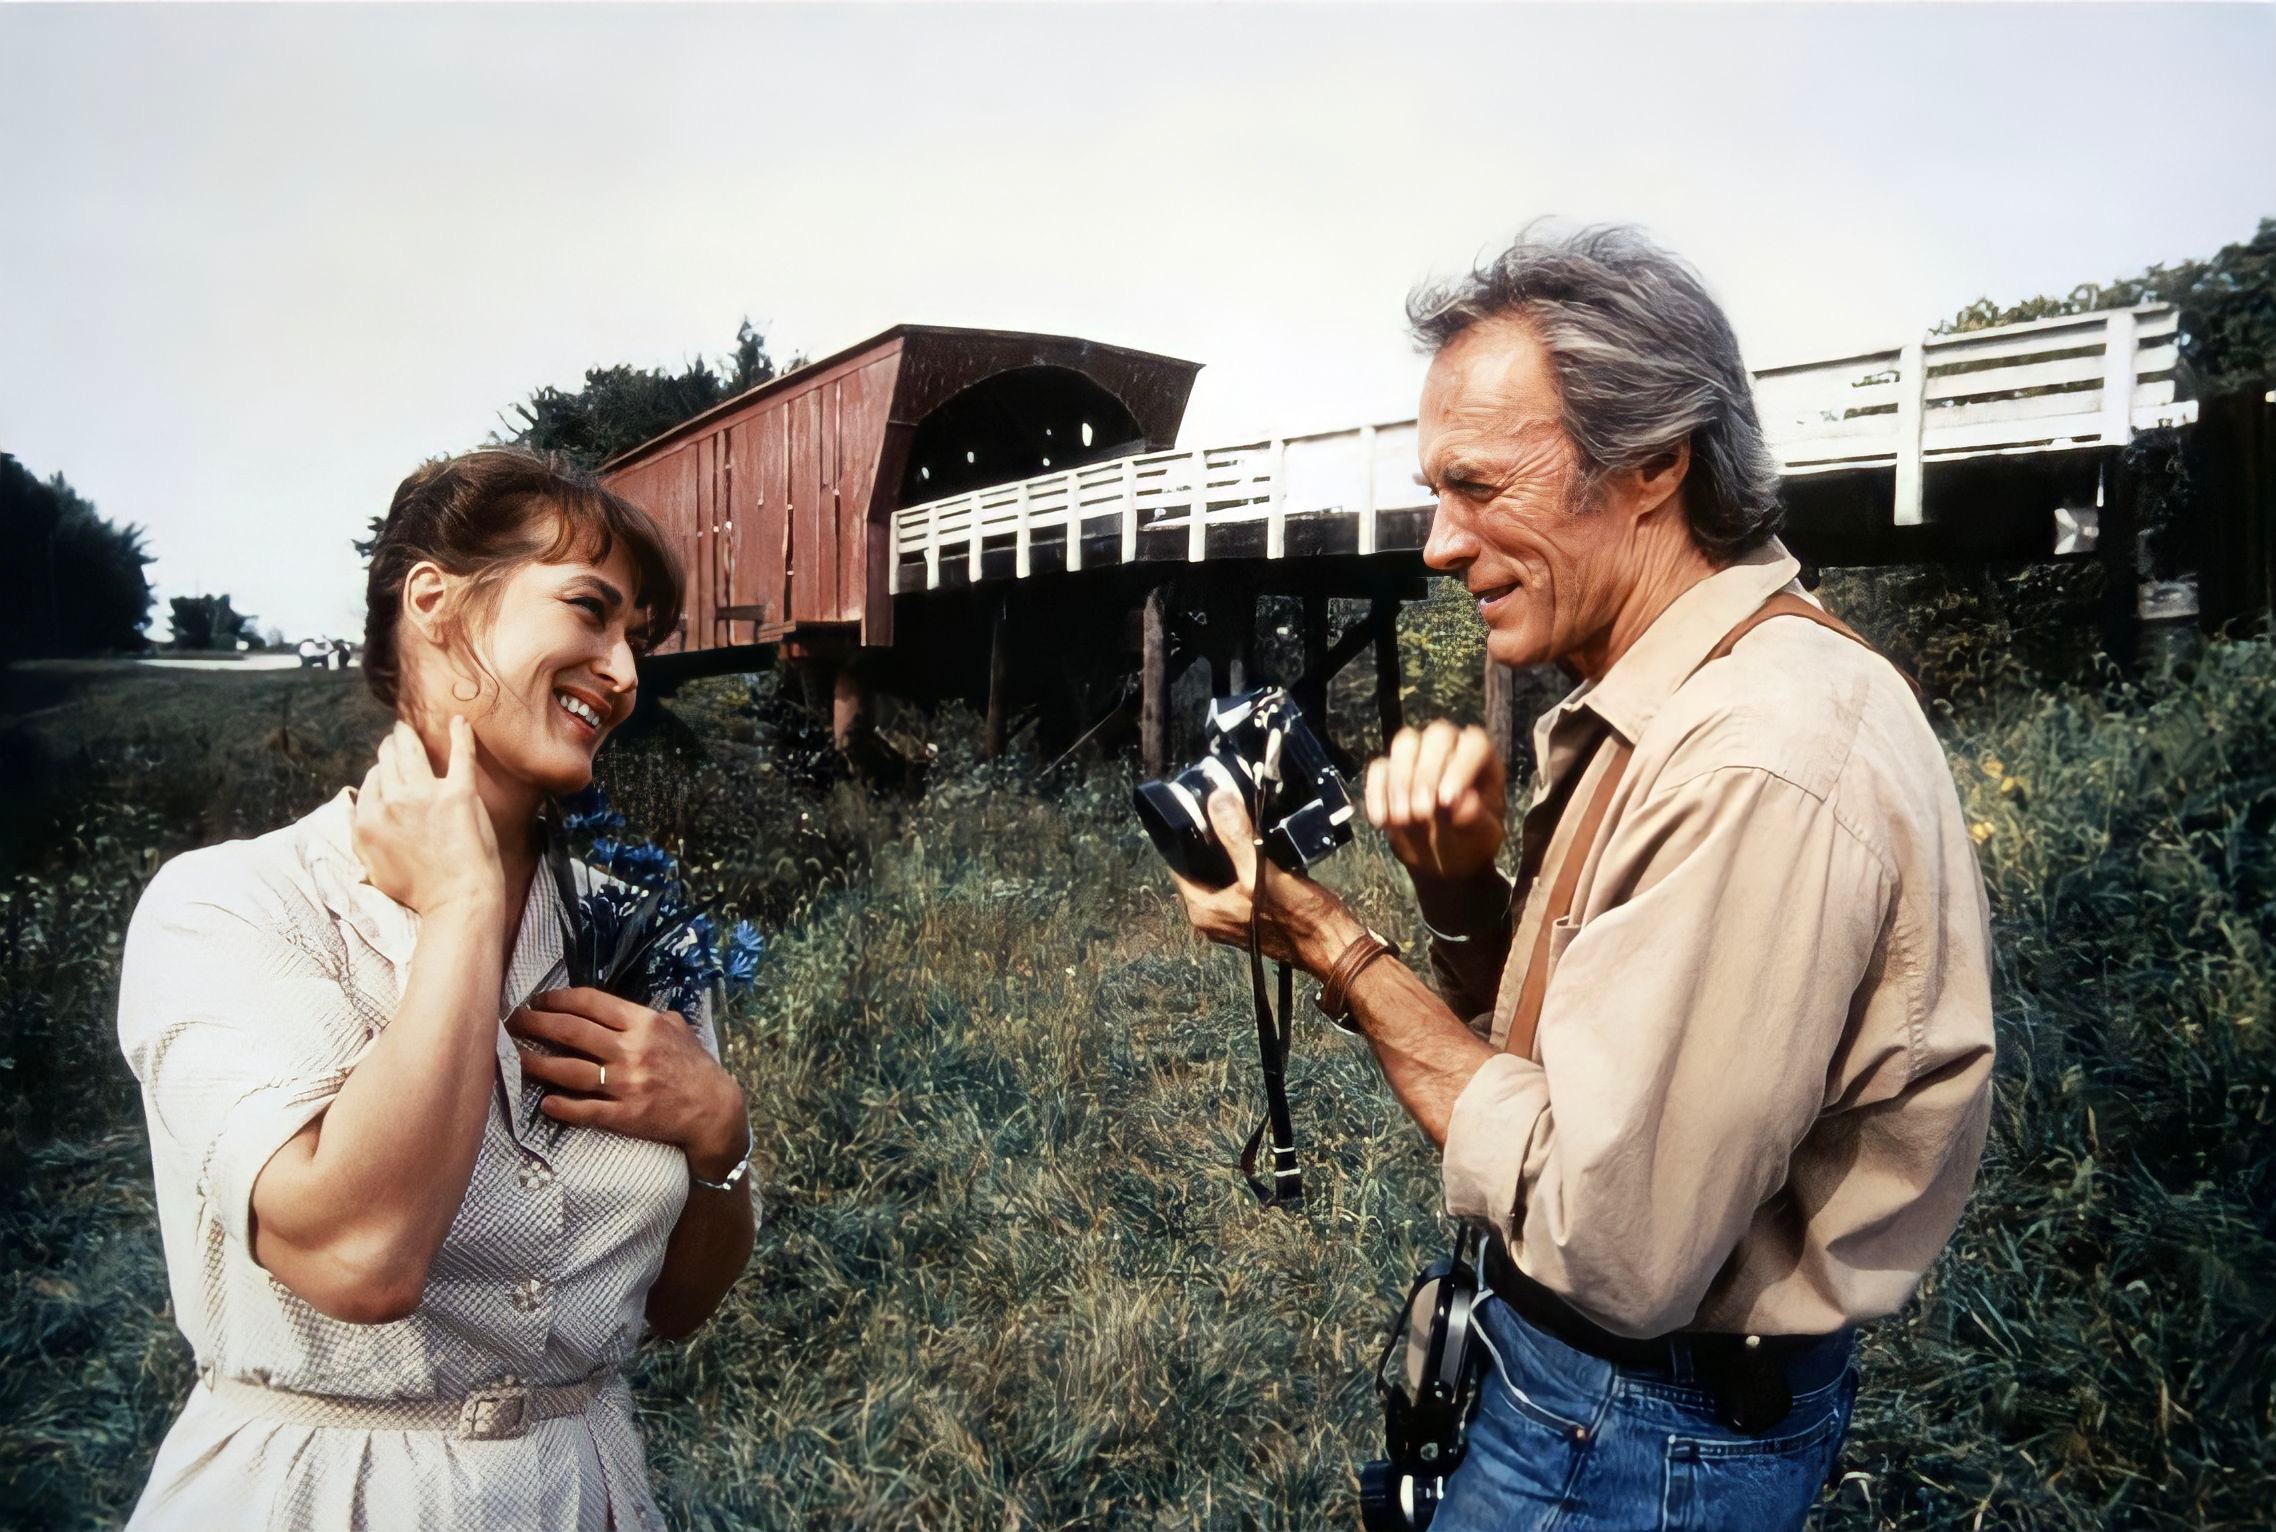 Meryl Streep and Clint Eastwood in The Bridges of Madison County